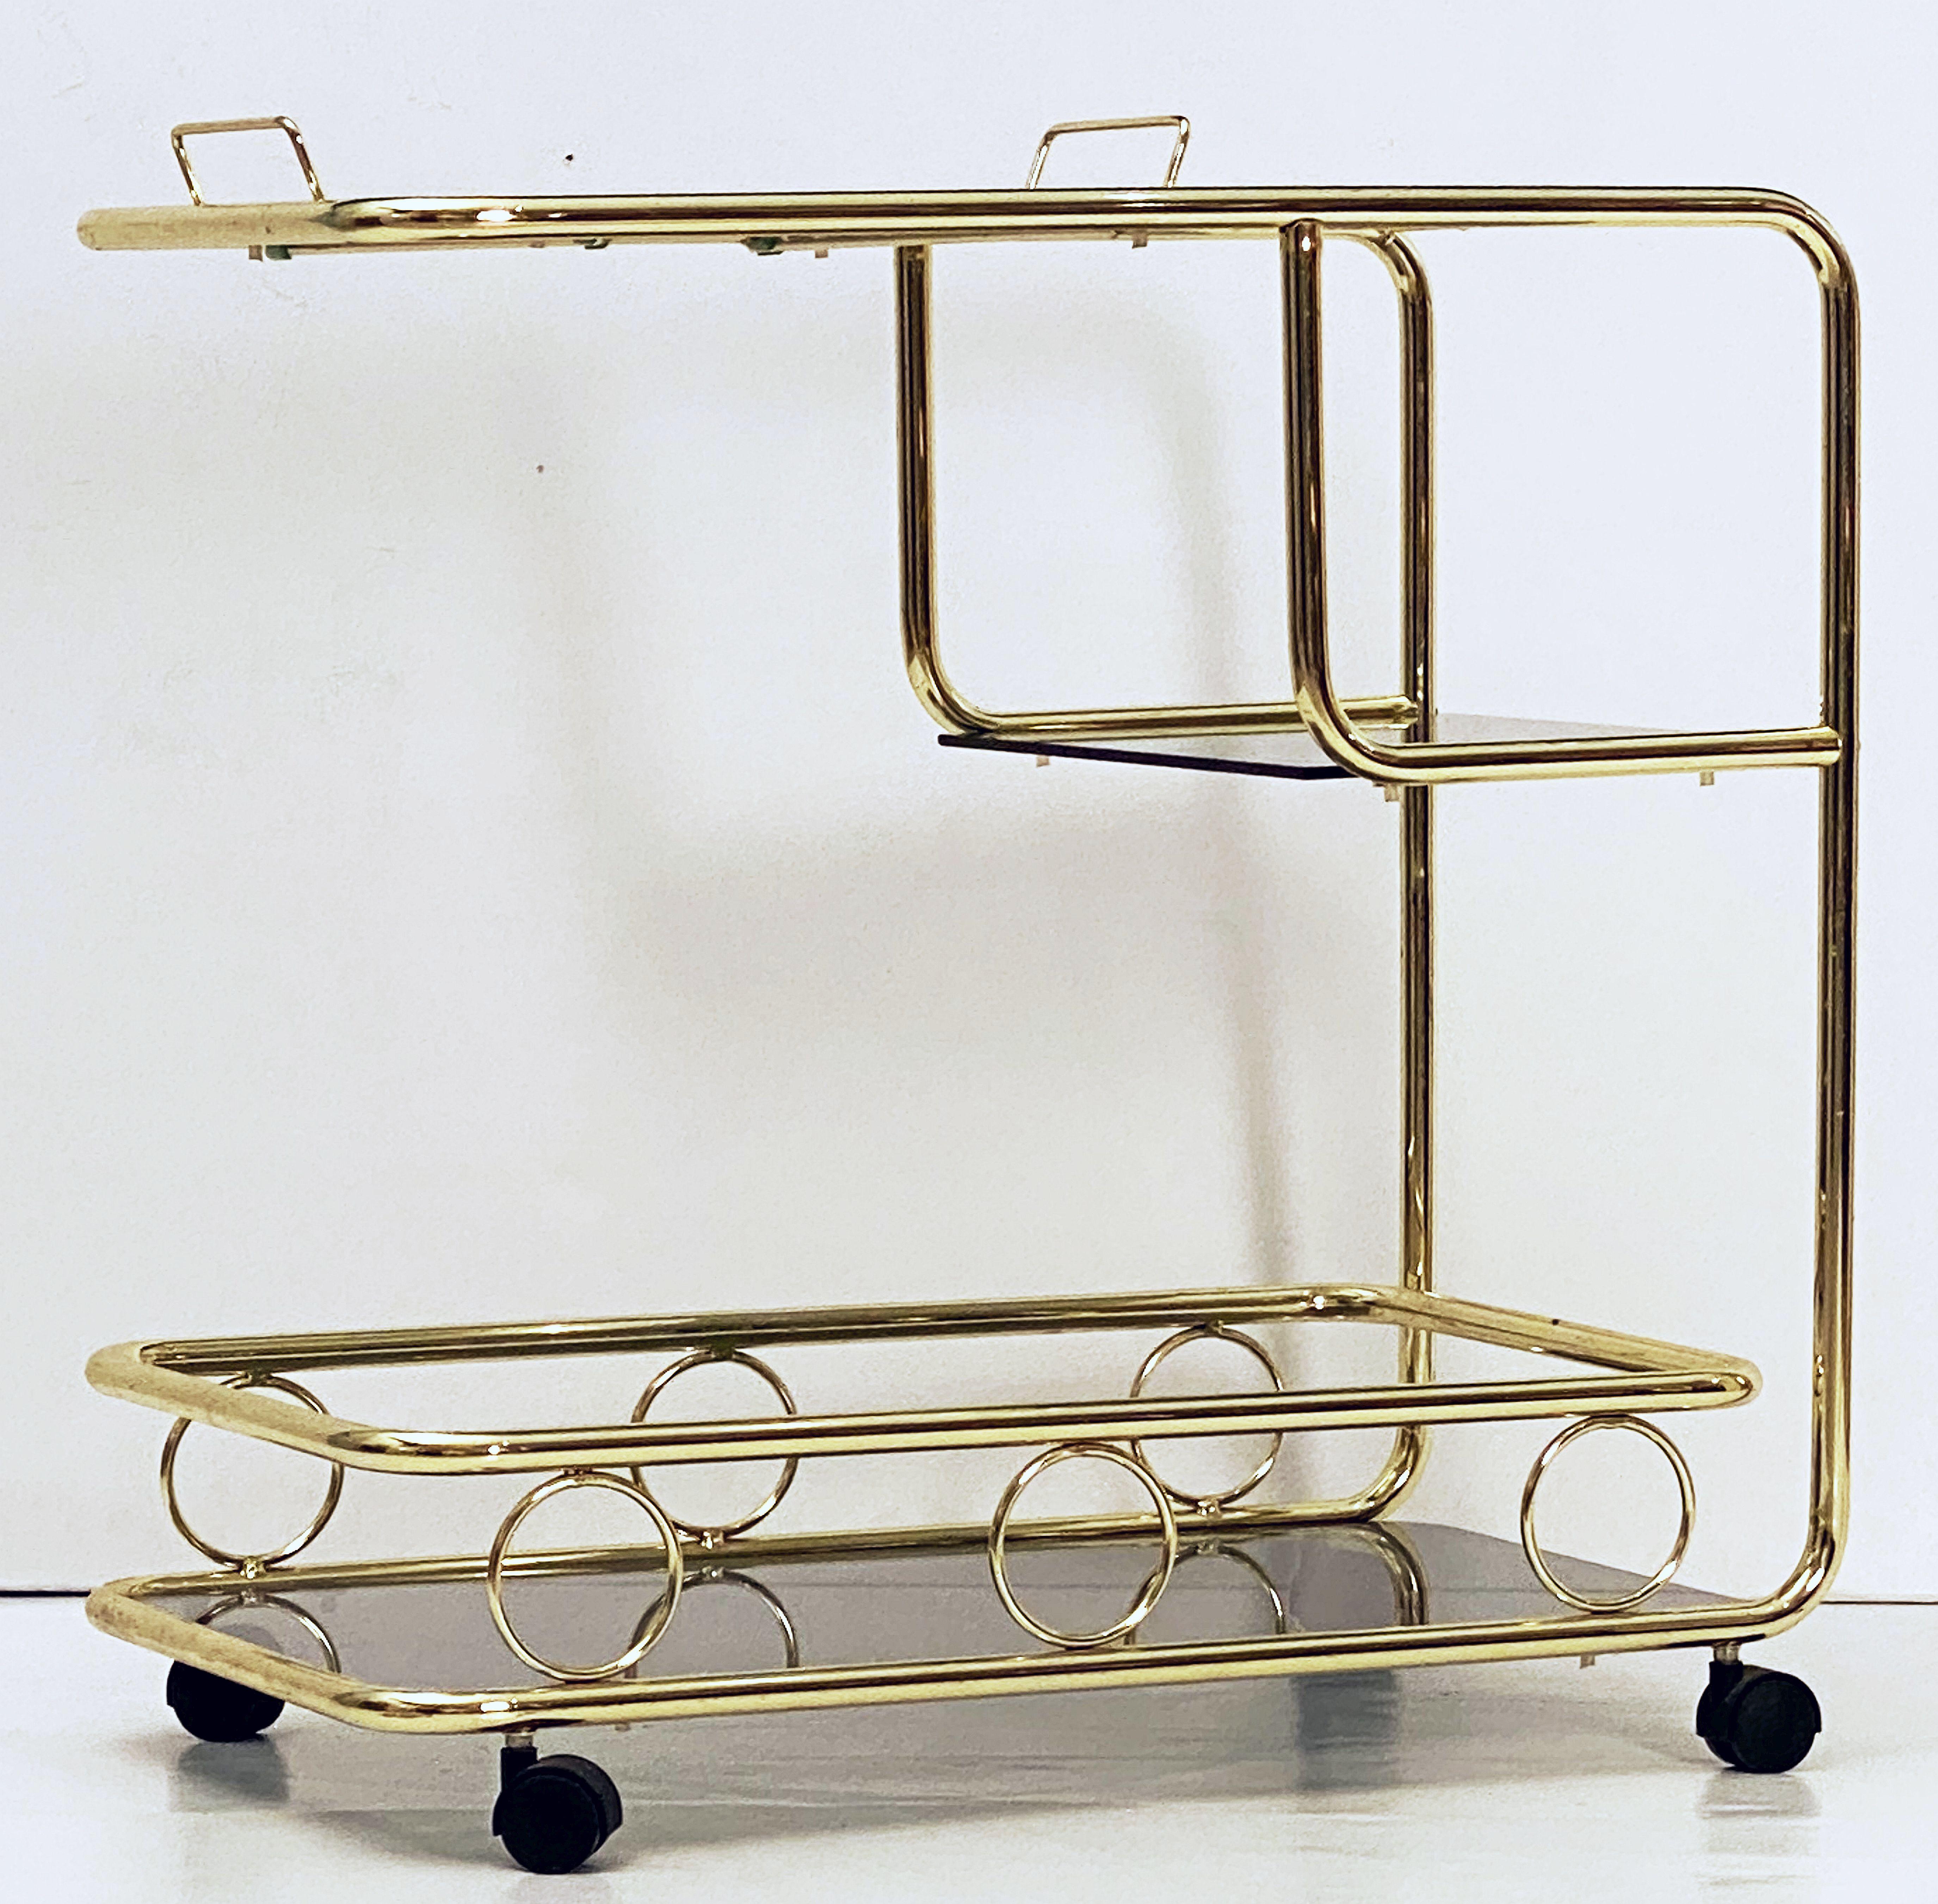 A handsome vintage French rectangular bar cart table or serving trolley in brass, and featuring three tinted glass tiers, with bottle rack on top tier, resting on rolling caster wheels. 

Perfect for use as a side or end table.